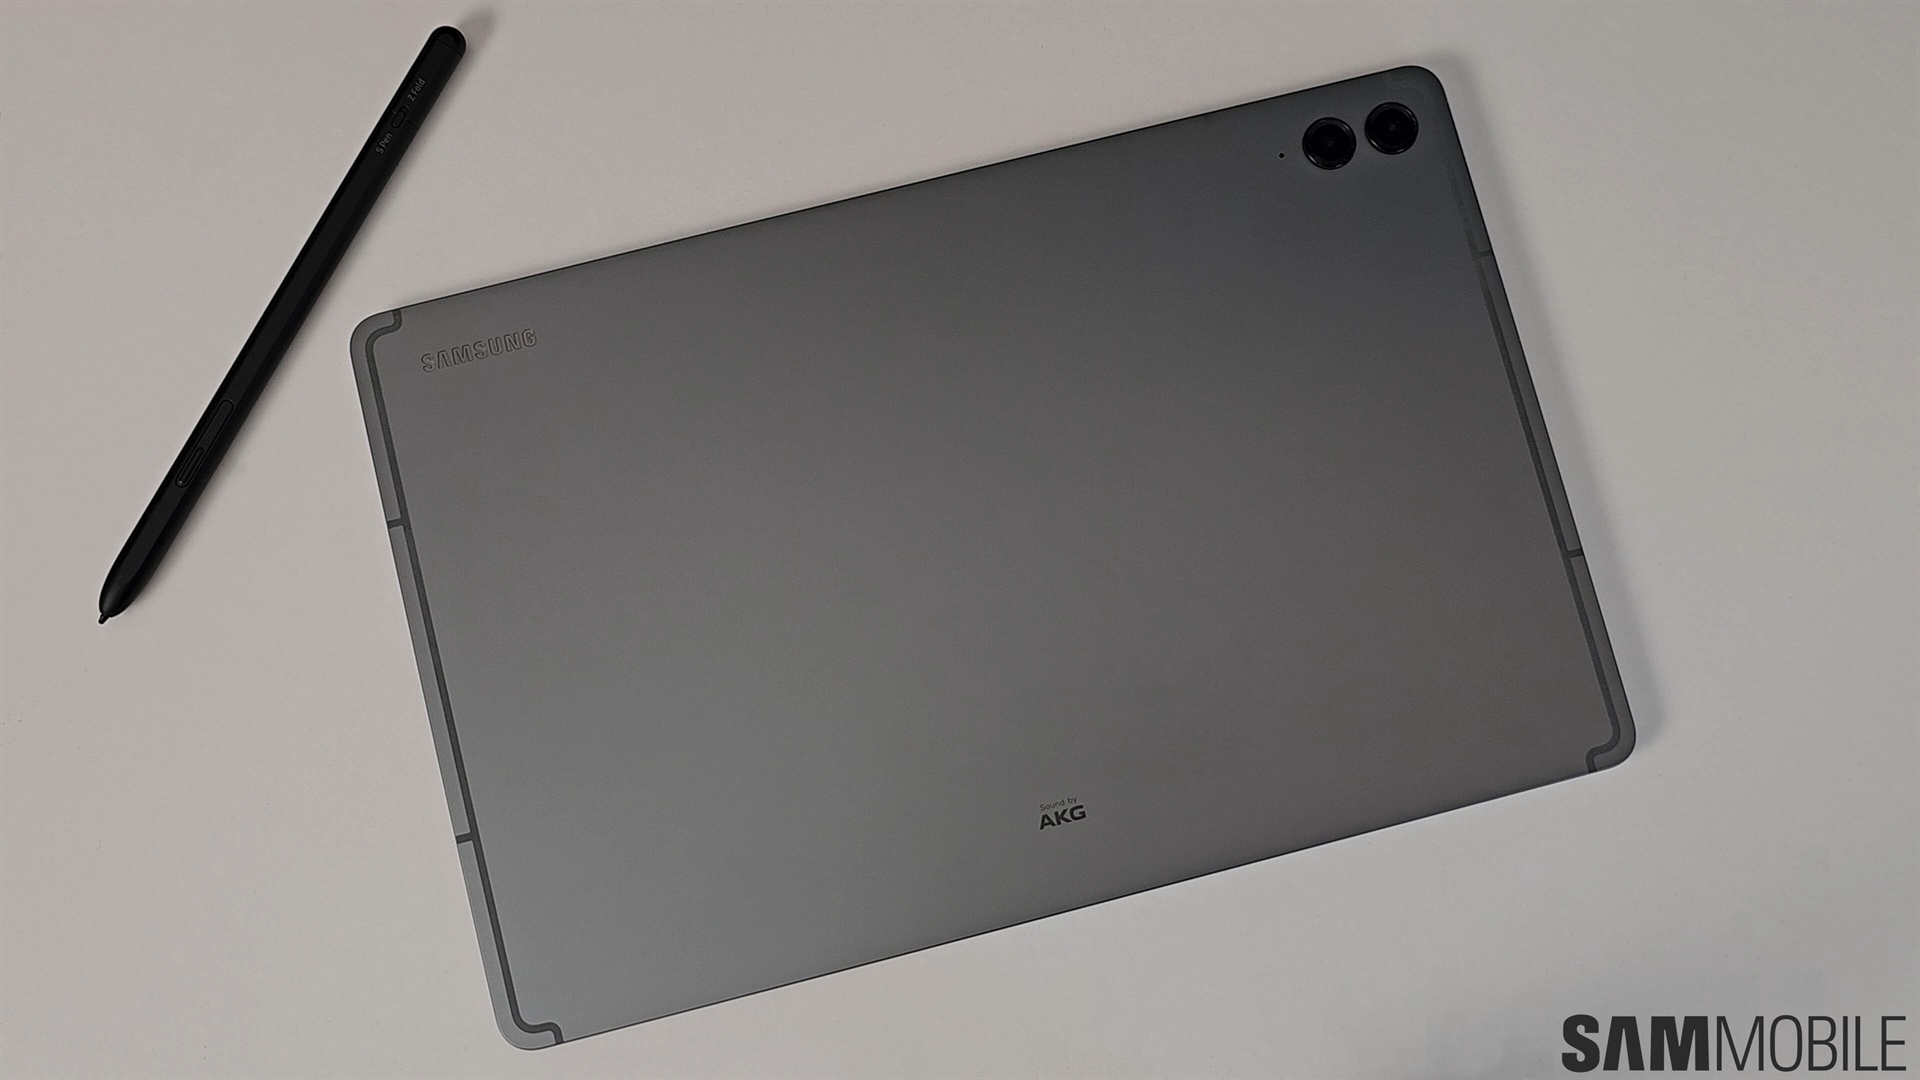 Samsung Galaxy S23 FE and Samsung Galaxy Tab S9 FE - It's All About the Chip